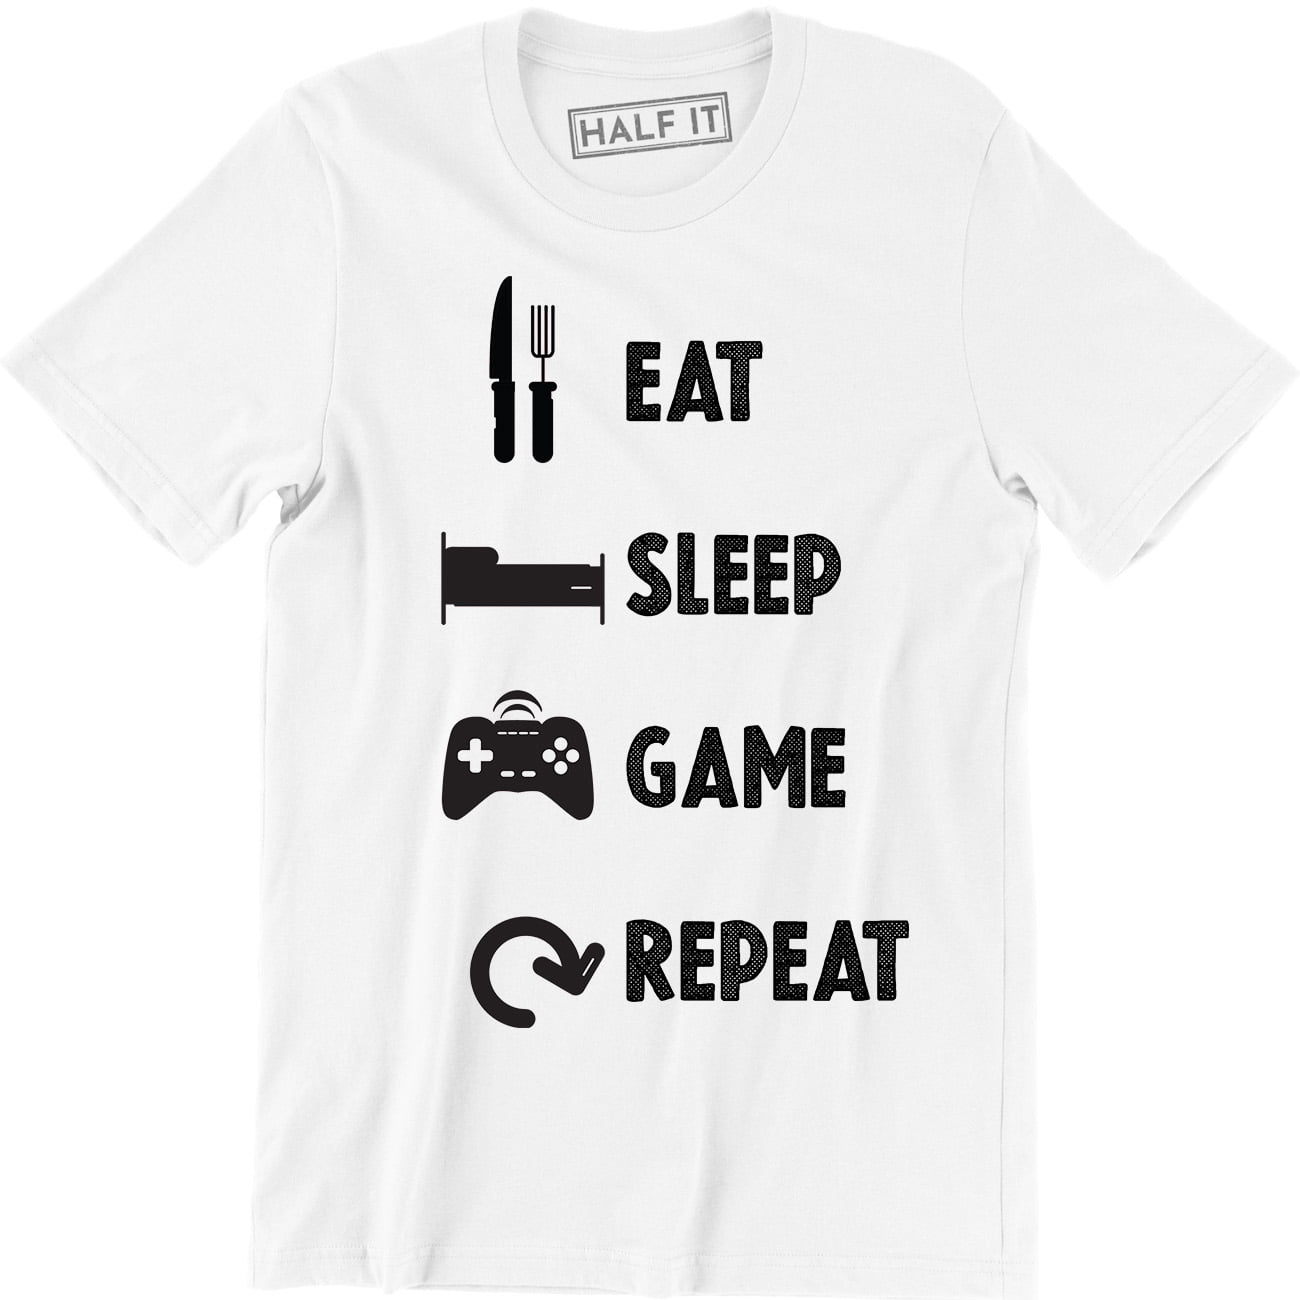 EAT SLEEP PAINT REPEAT Funny T-Shirt for a Paint and Decorator Workwear T-Shirt 